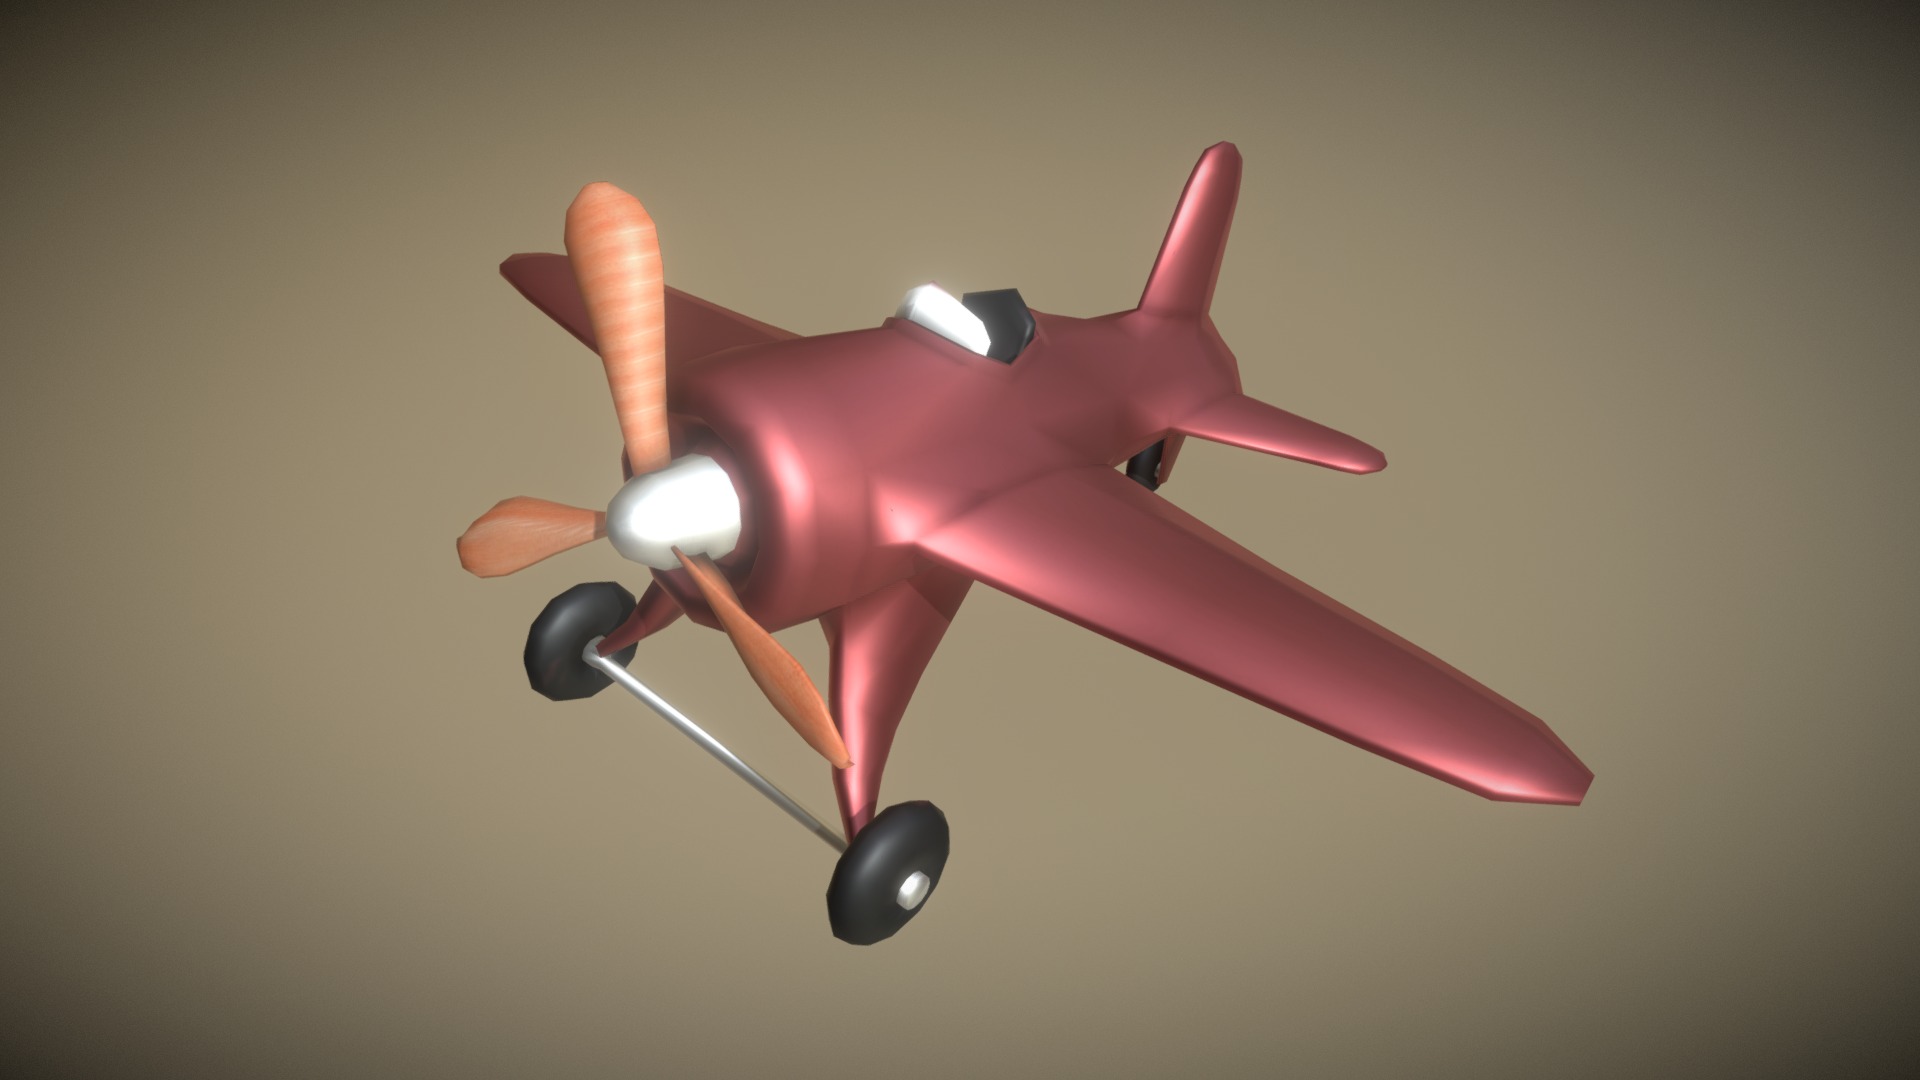 3D model Airplane Toy Low Poly Game Ready - This is a 3D model of the Airplane Toy Low Poly Game Ready. The 3D model is about a red and white ceiling fan.